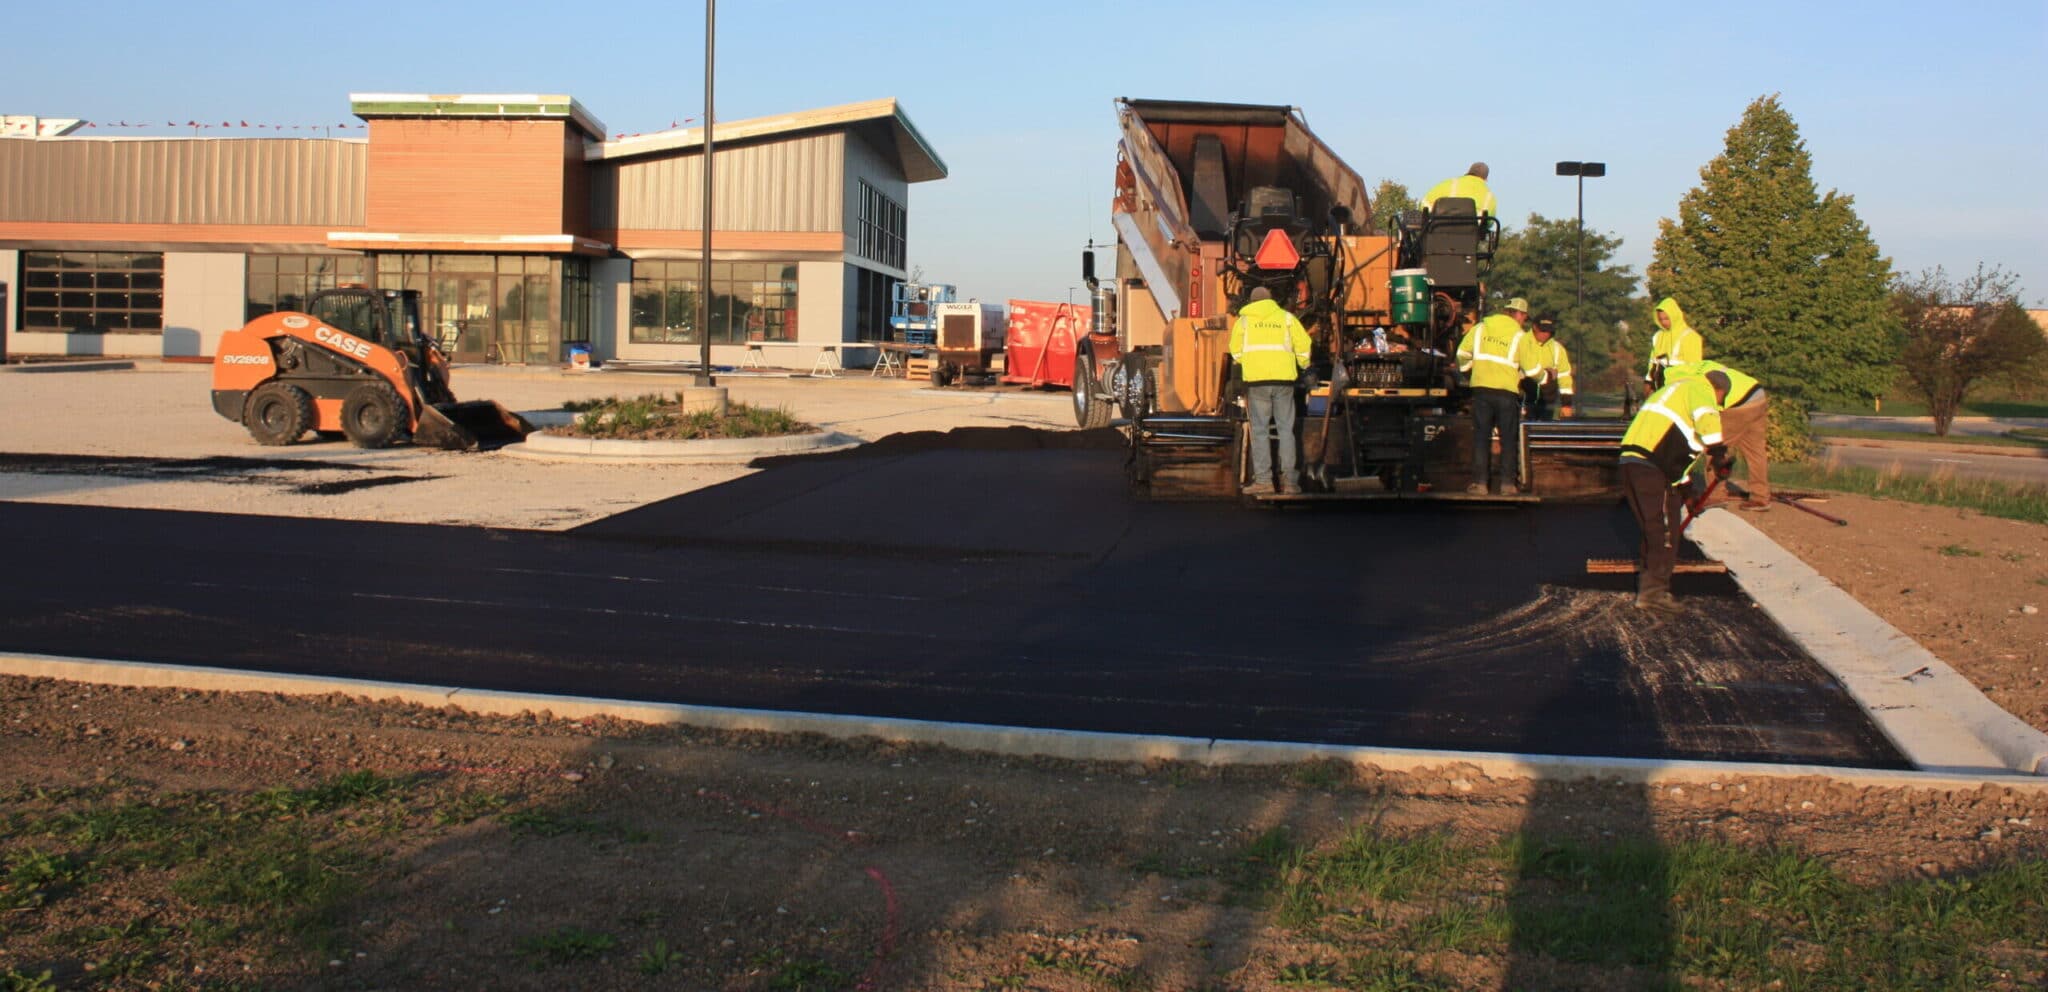 twin lakes paving company, paving company in twin lakes, companies in twin lakes for paving